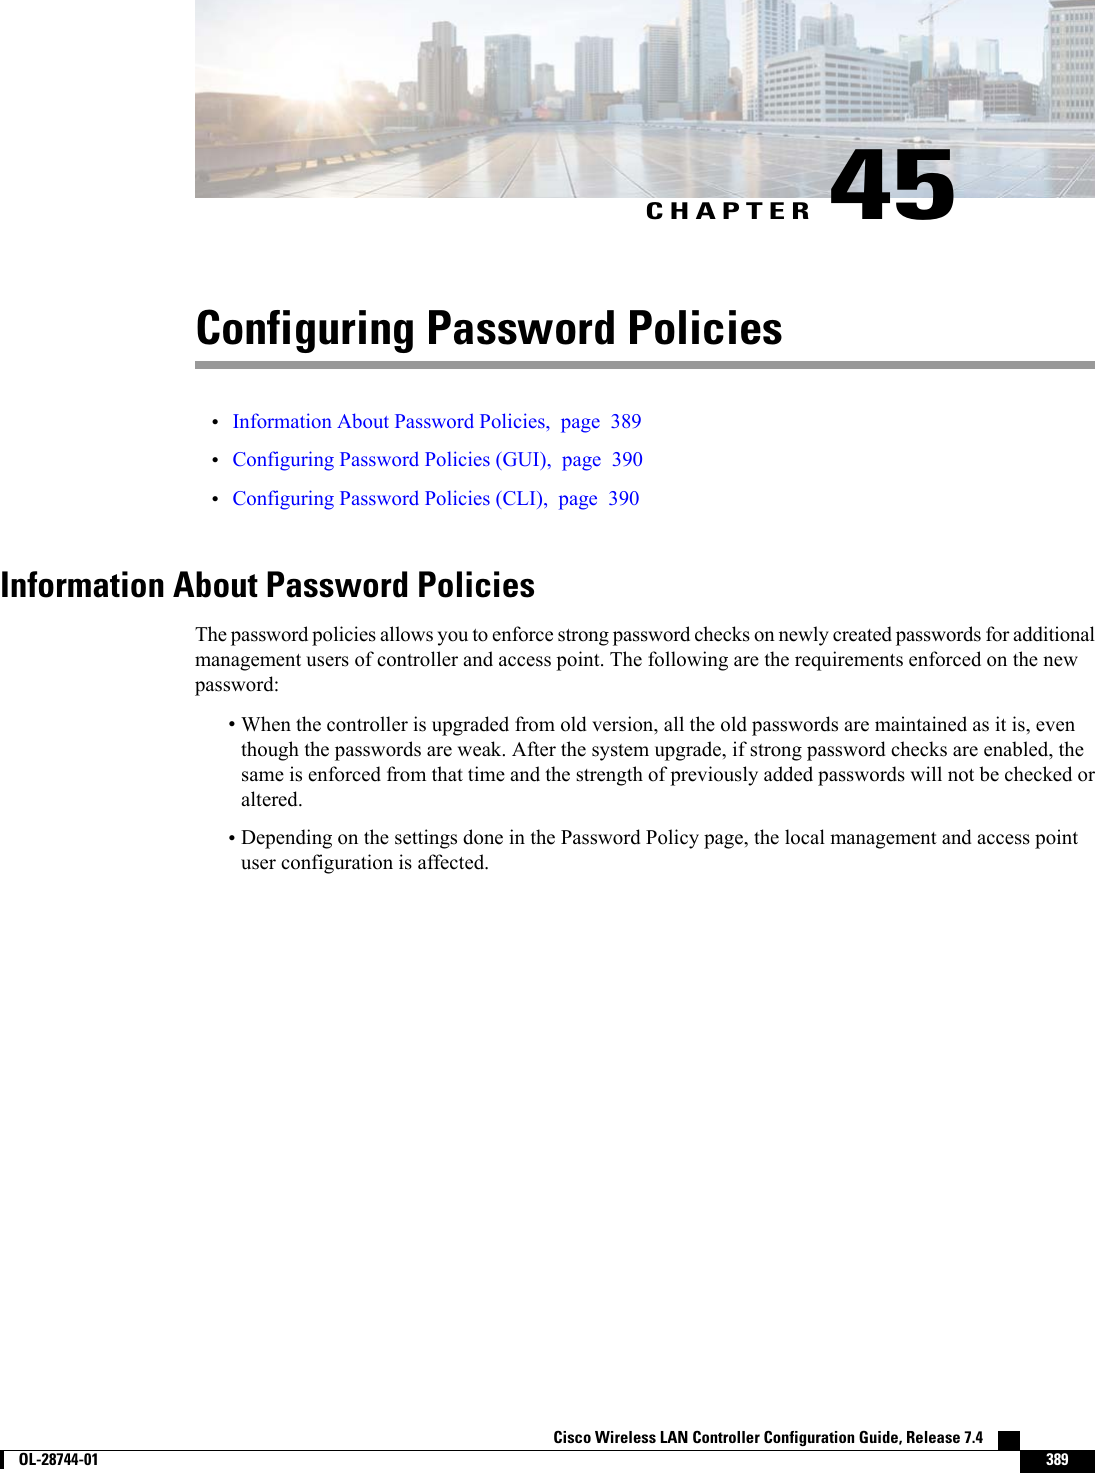 CHAPTER 45Configuring Password Policies•Information About Password Policies, page 389•Configuring Password Policies (GUI), page 390•Configuring Password Policies (CLI), page 390Information About Password PoliciesThe password policies allows you to enforce strong password checks on newly created passwords for additionalmanagement users of controller and access point. The following are the requirements enforced on the newpassword:•When the controller is upgraded from old version, all the old passwords are maintained as it is, eventhough the passwords are weak. After the system upgrade, if strong password checks are enabled, thesame is enforced from that time and the strength of previously added passwords will not be checked oraltered.•Depending on the settings done in the Password Policy page, the local management and access pointuser configuration is affected.Cisco Wireless LAN Controller Configuration Guide, Release 7.4        OL-28744-01 389